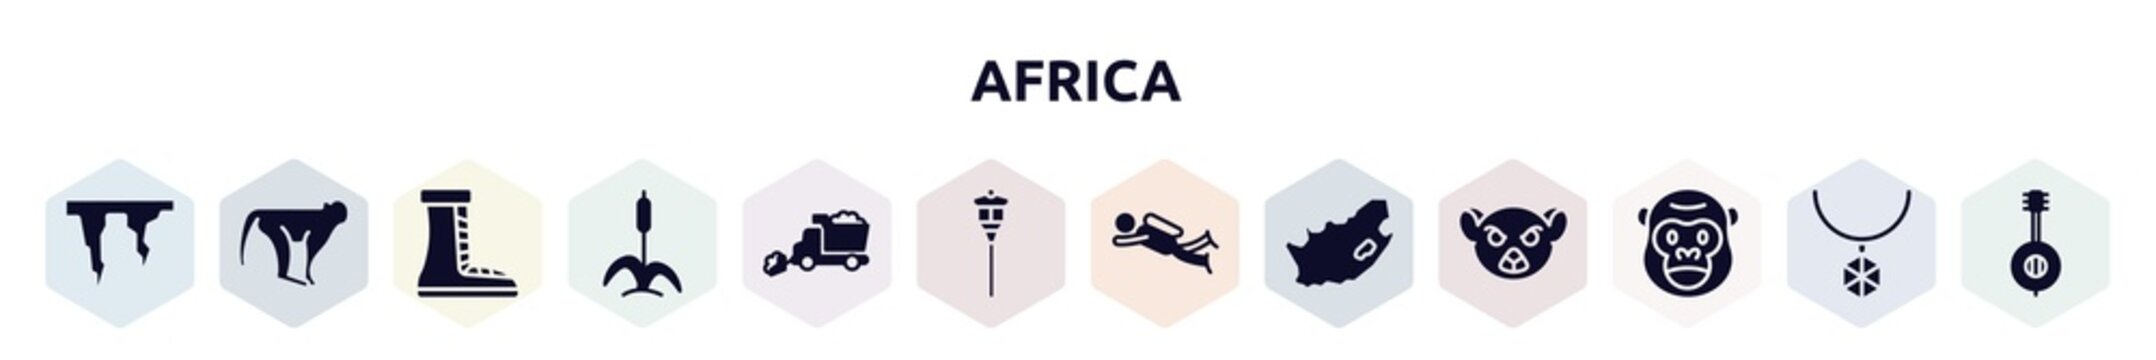 africa filled icons set. glyph icons such as icicle, monkeys, boot, cattail, snowplow, street light, diving, south africa, gorilla icon.